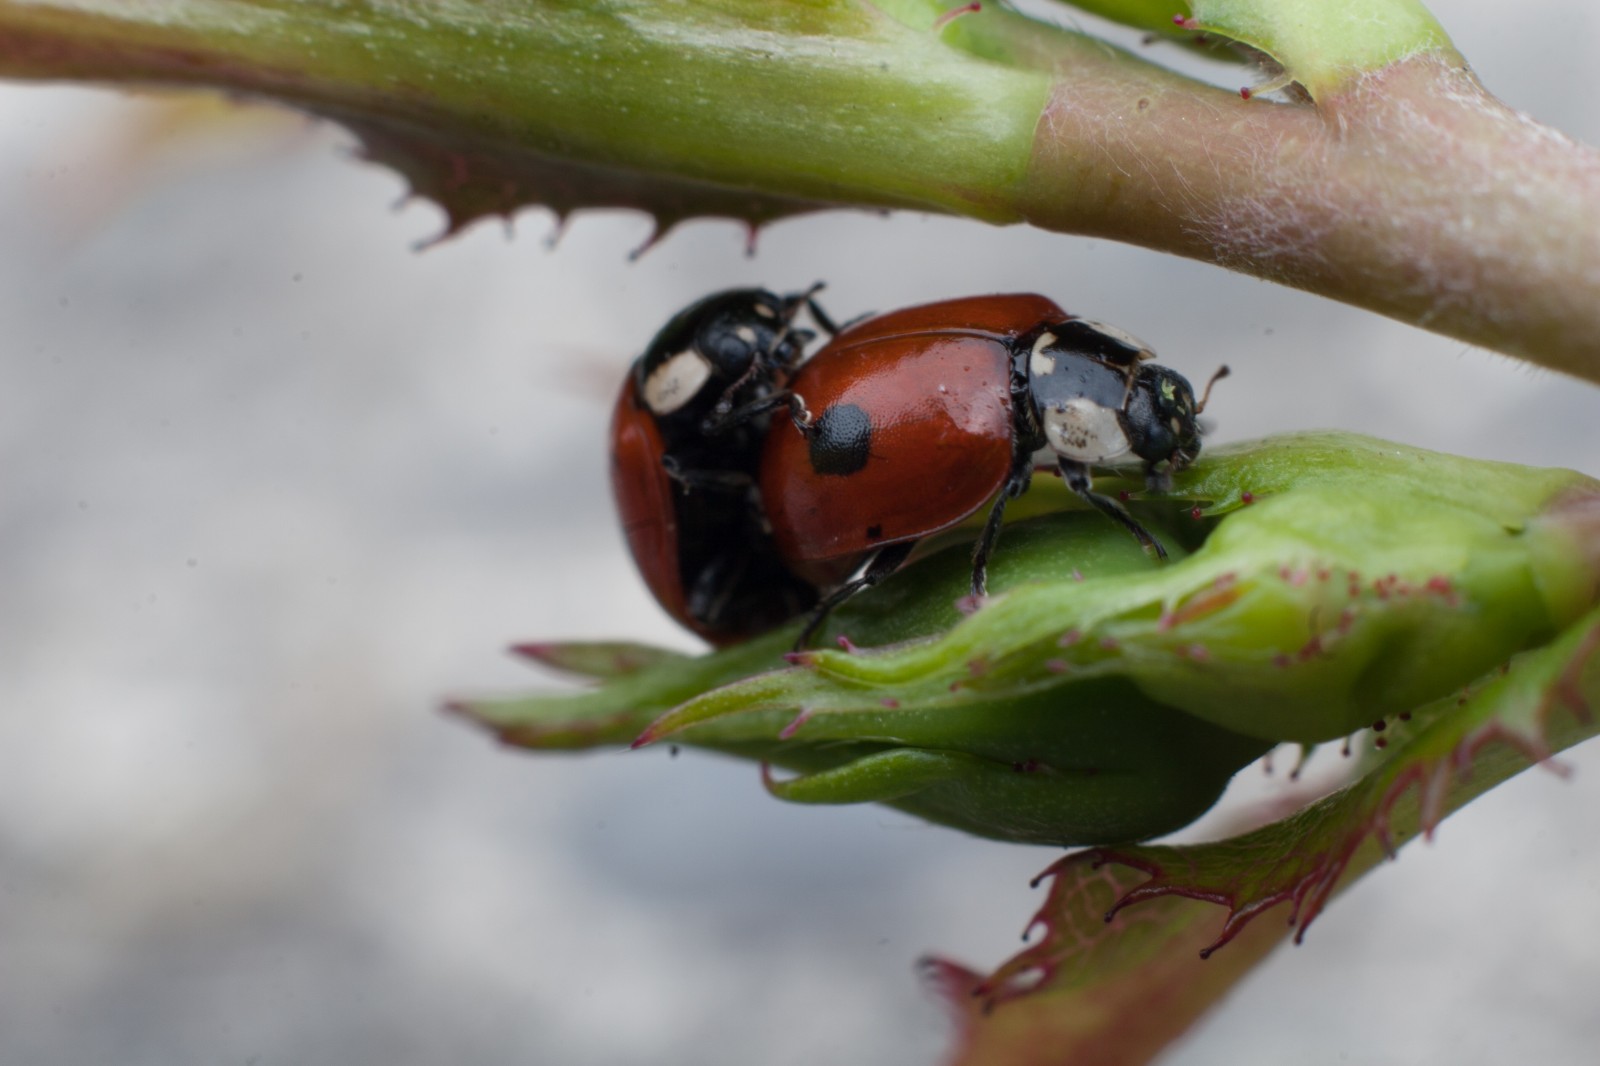 two ladybugs doing their business